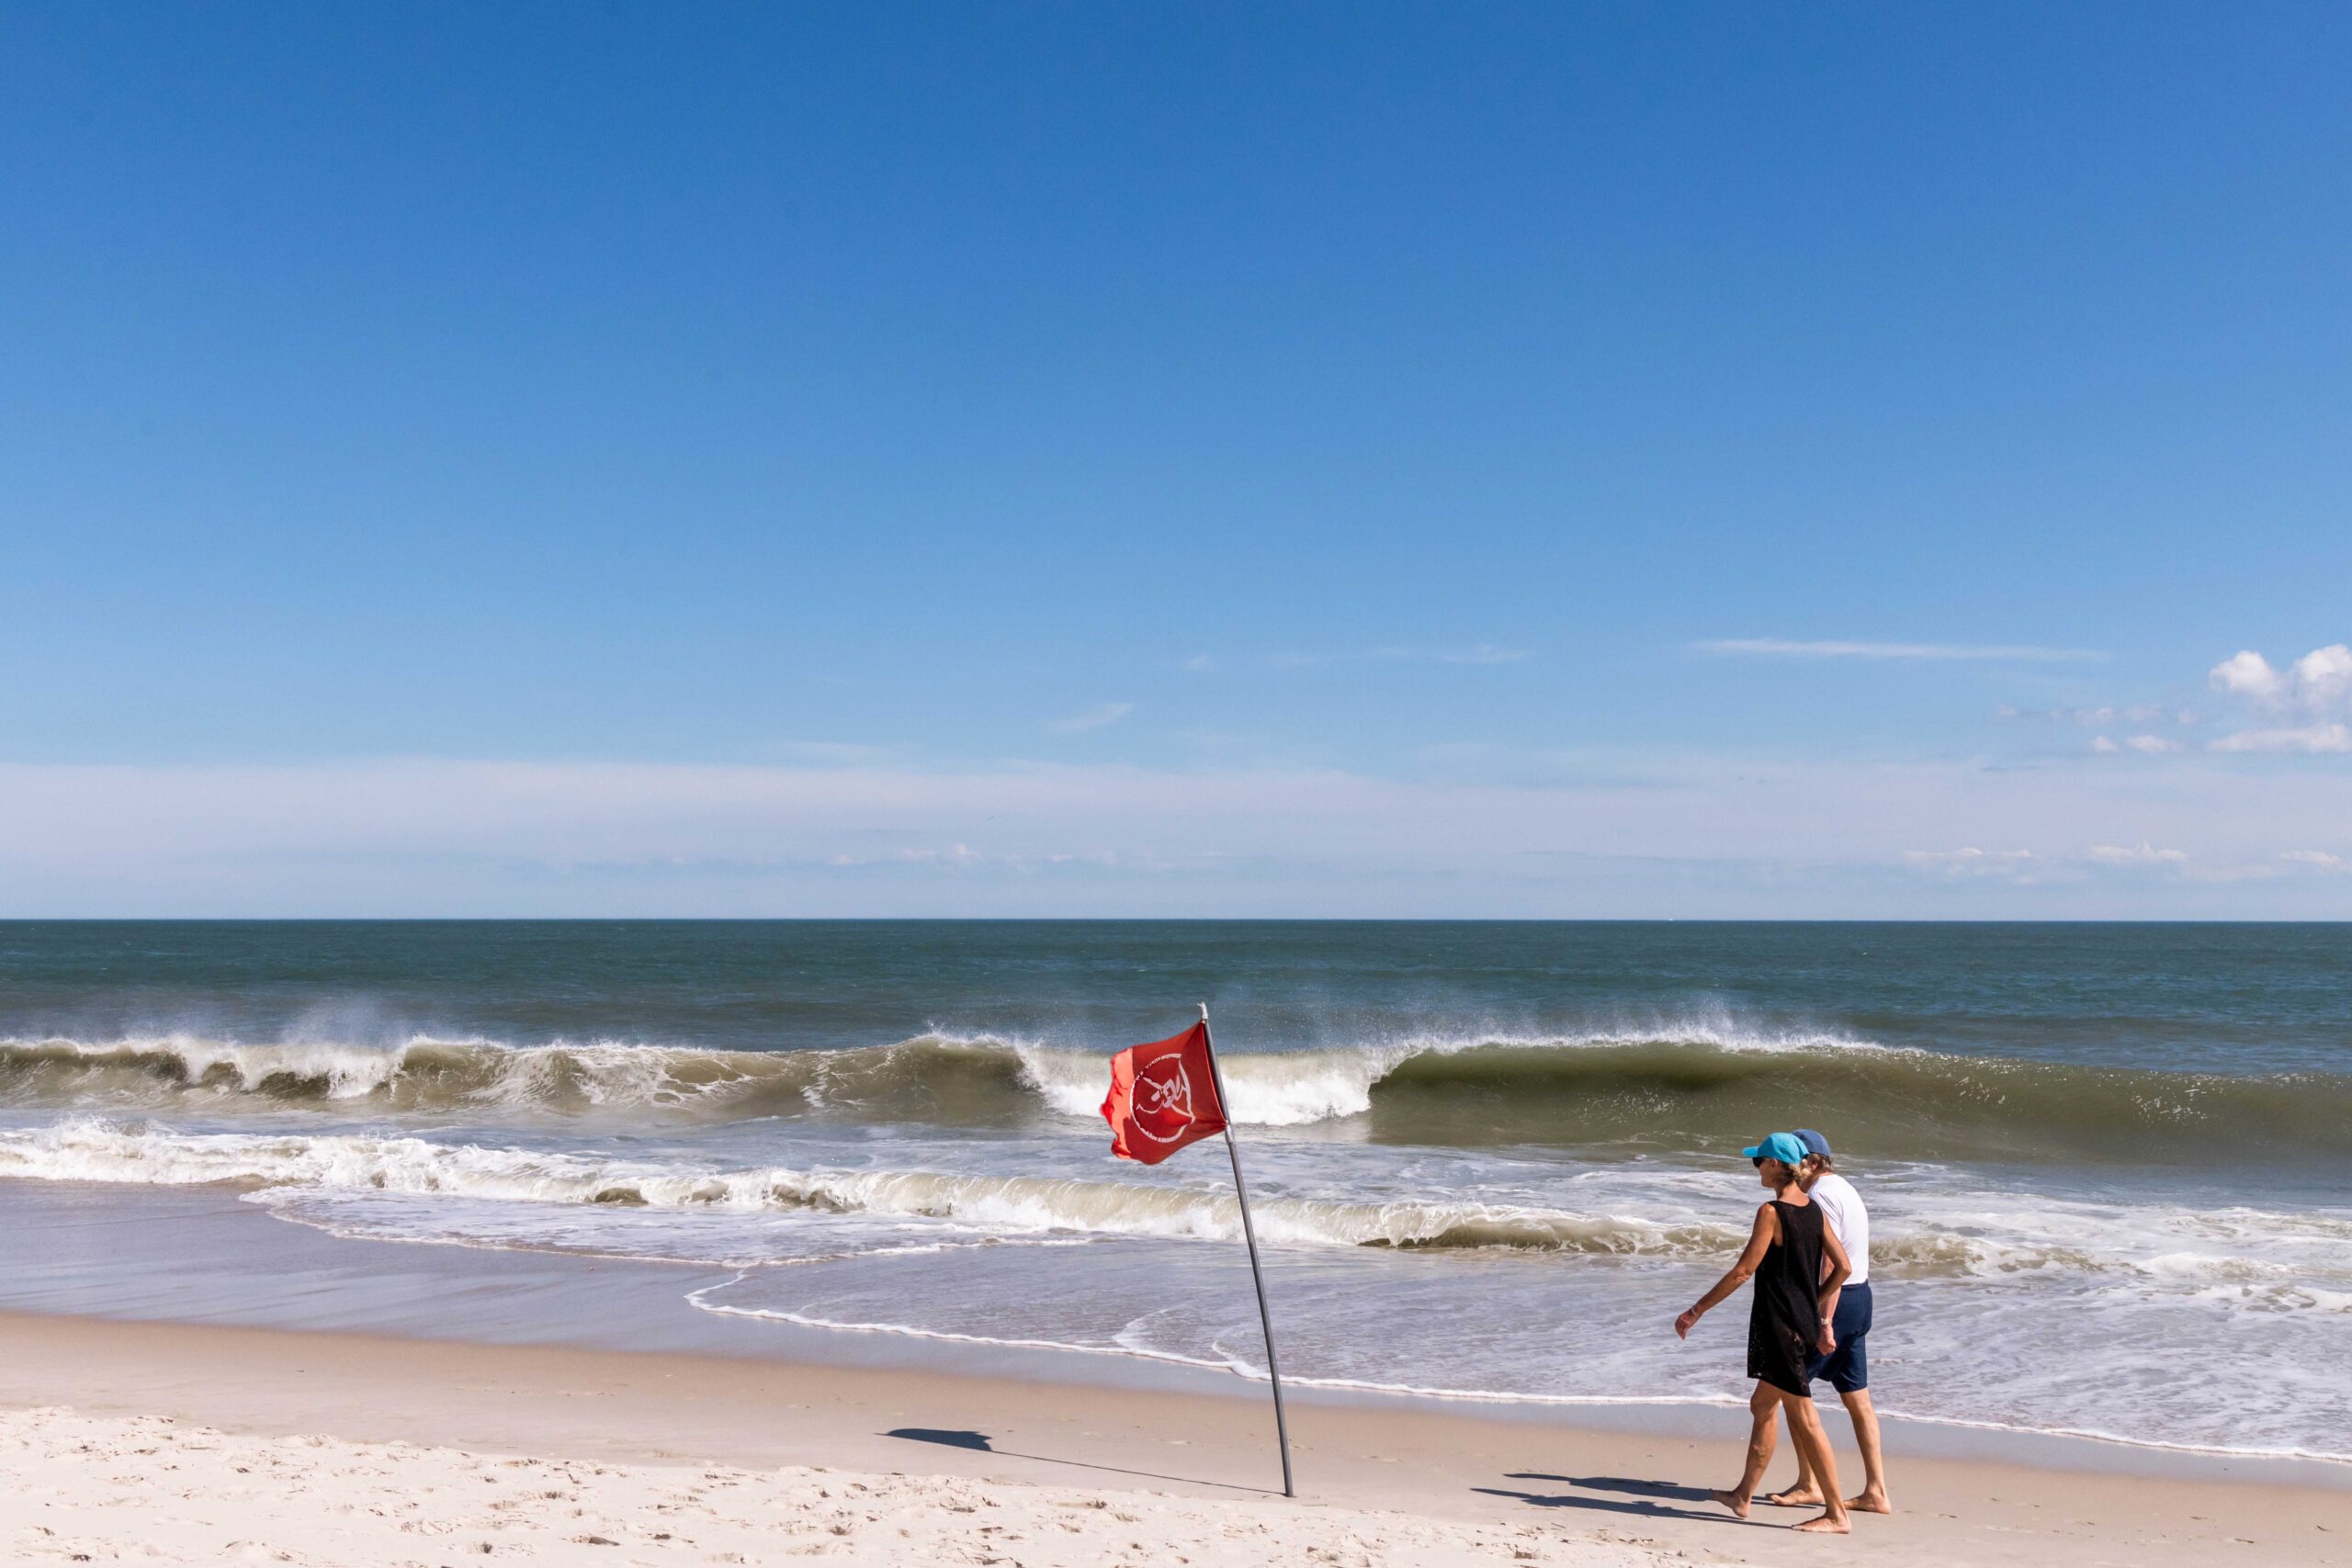 Two people walking on the beach on a sunny day with a bright blue sky. A wave is crashing in the ocean and a red don't swim flag on the beach is blowing in the breeze.